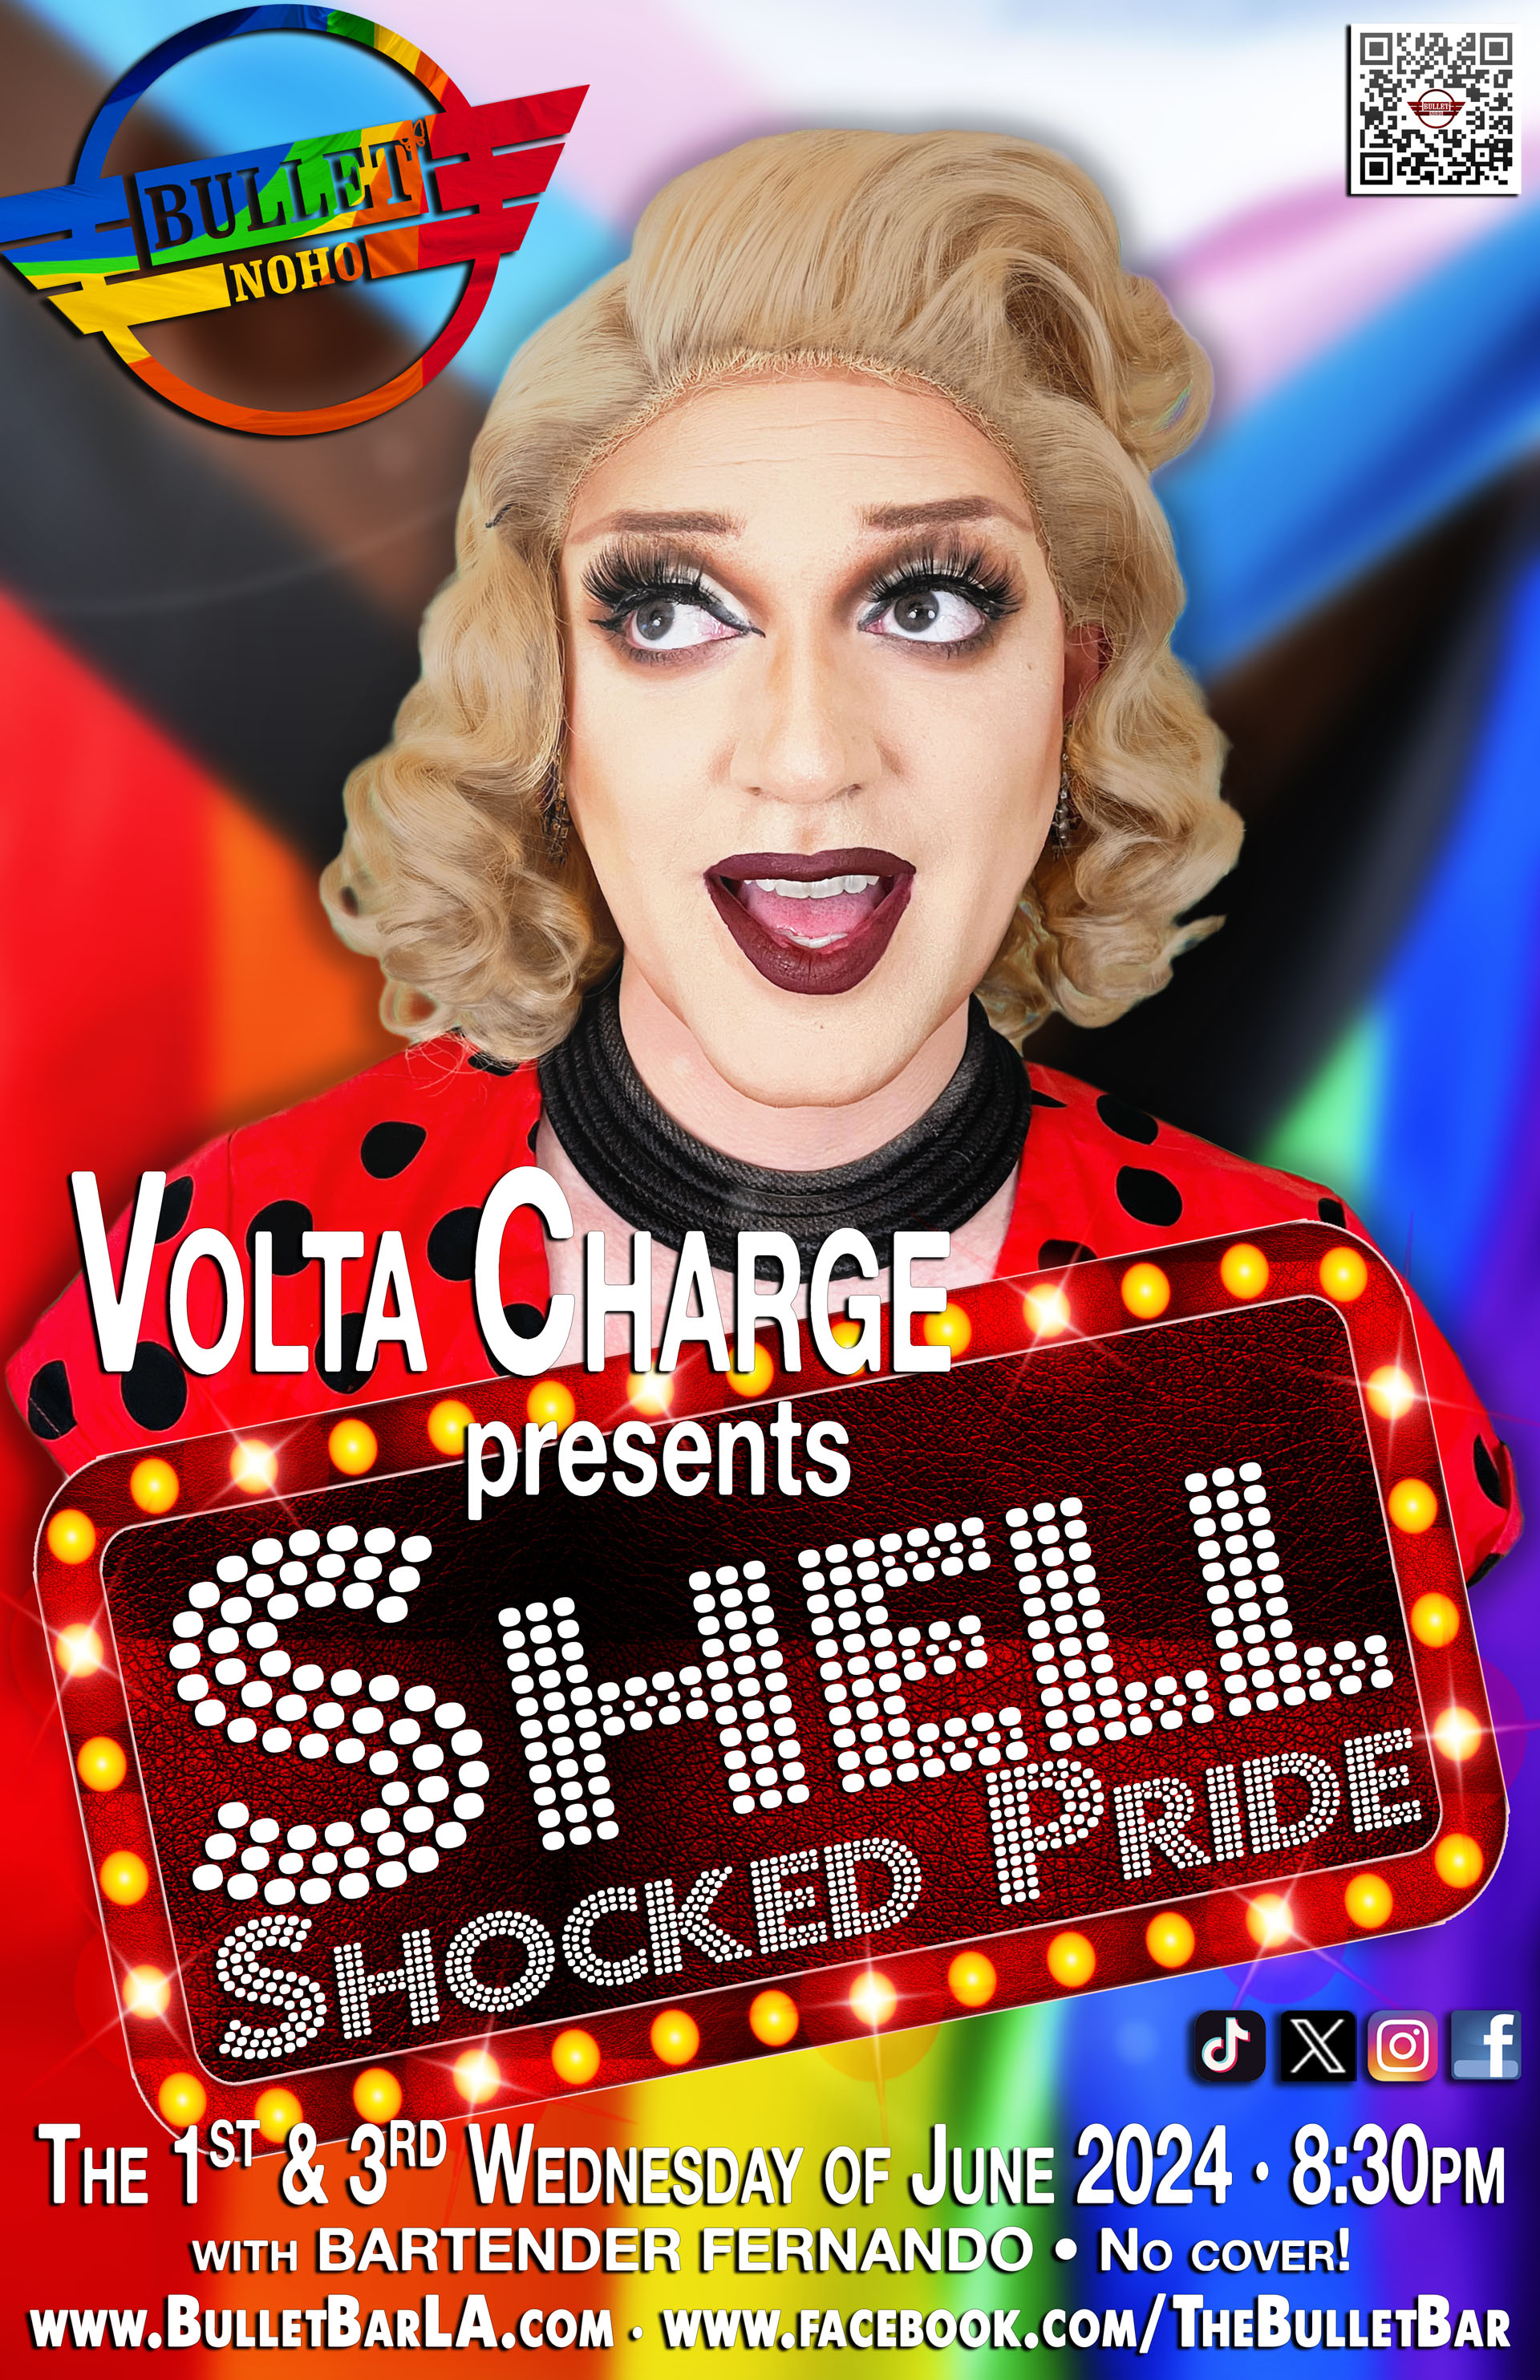 THE BULLET BAR & VOLTA CHARGE Present SHELL SHOCKED PRIDE: Wednesday, 06/05/23 at 8:30 PM! No Cover!